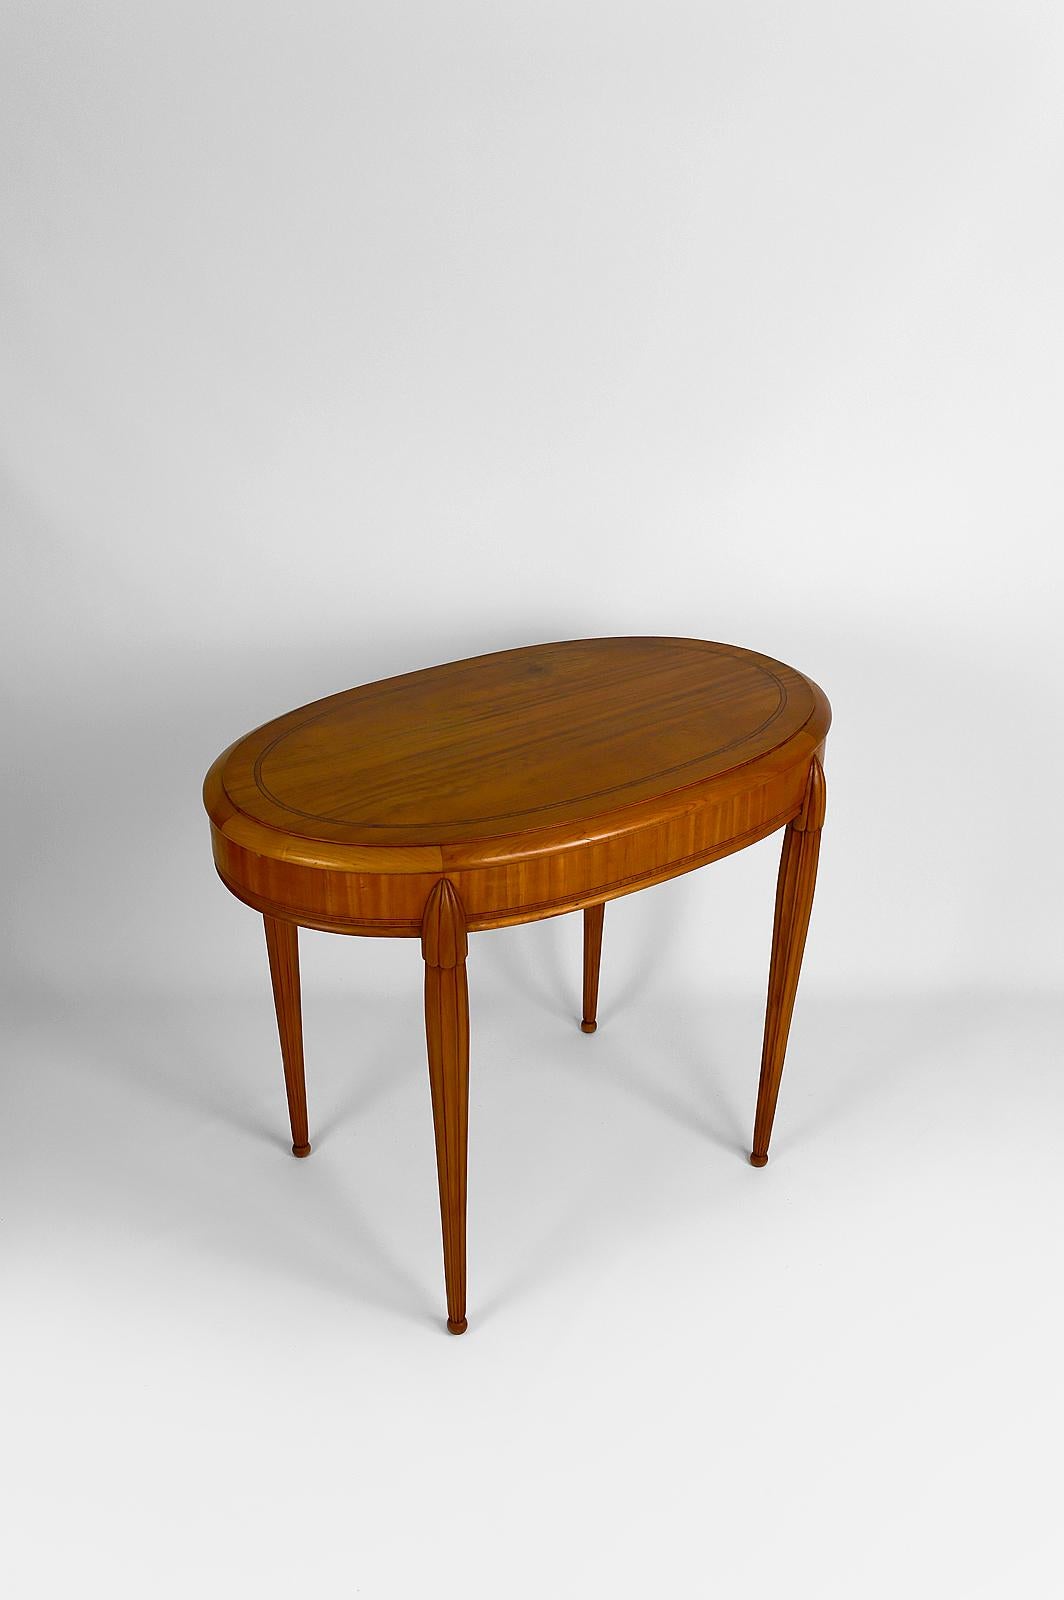 Wood Art Deco Oval Pedestal Table with Marquetry, France, circa 1920